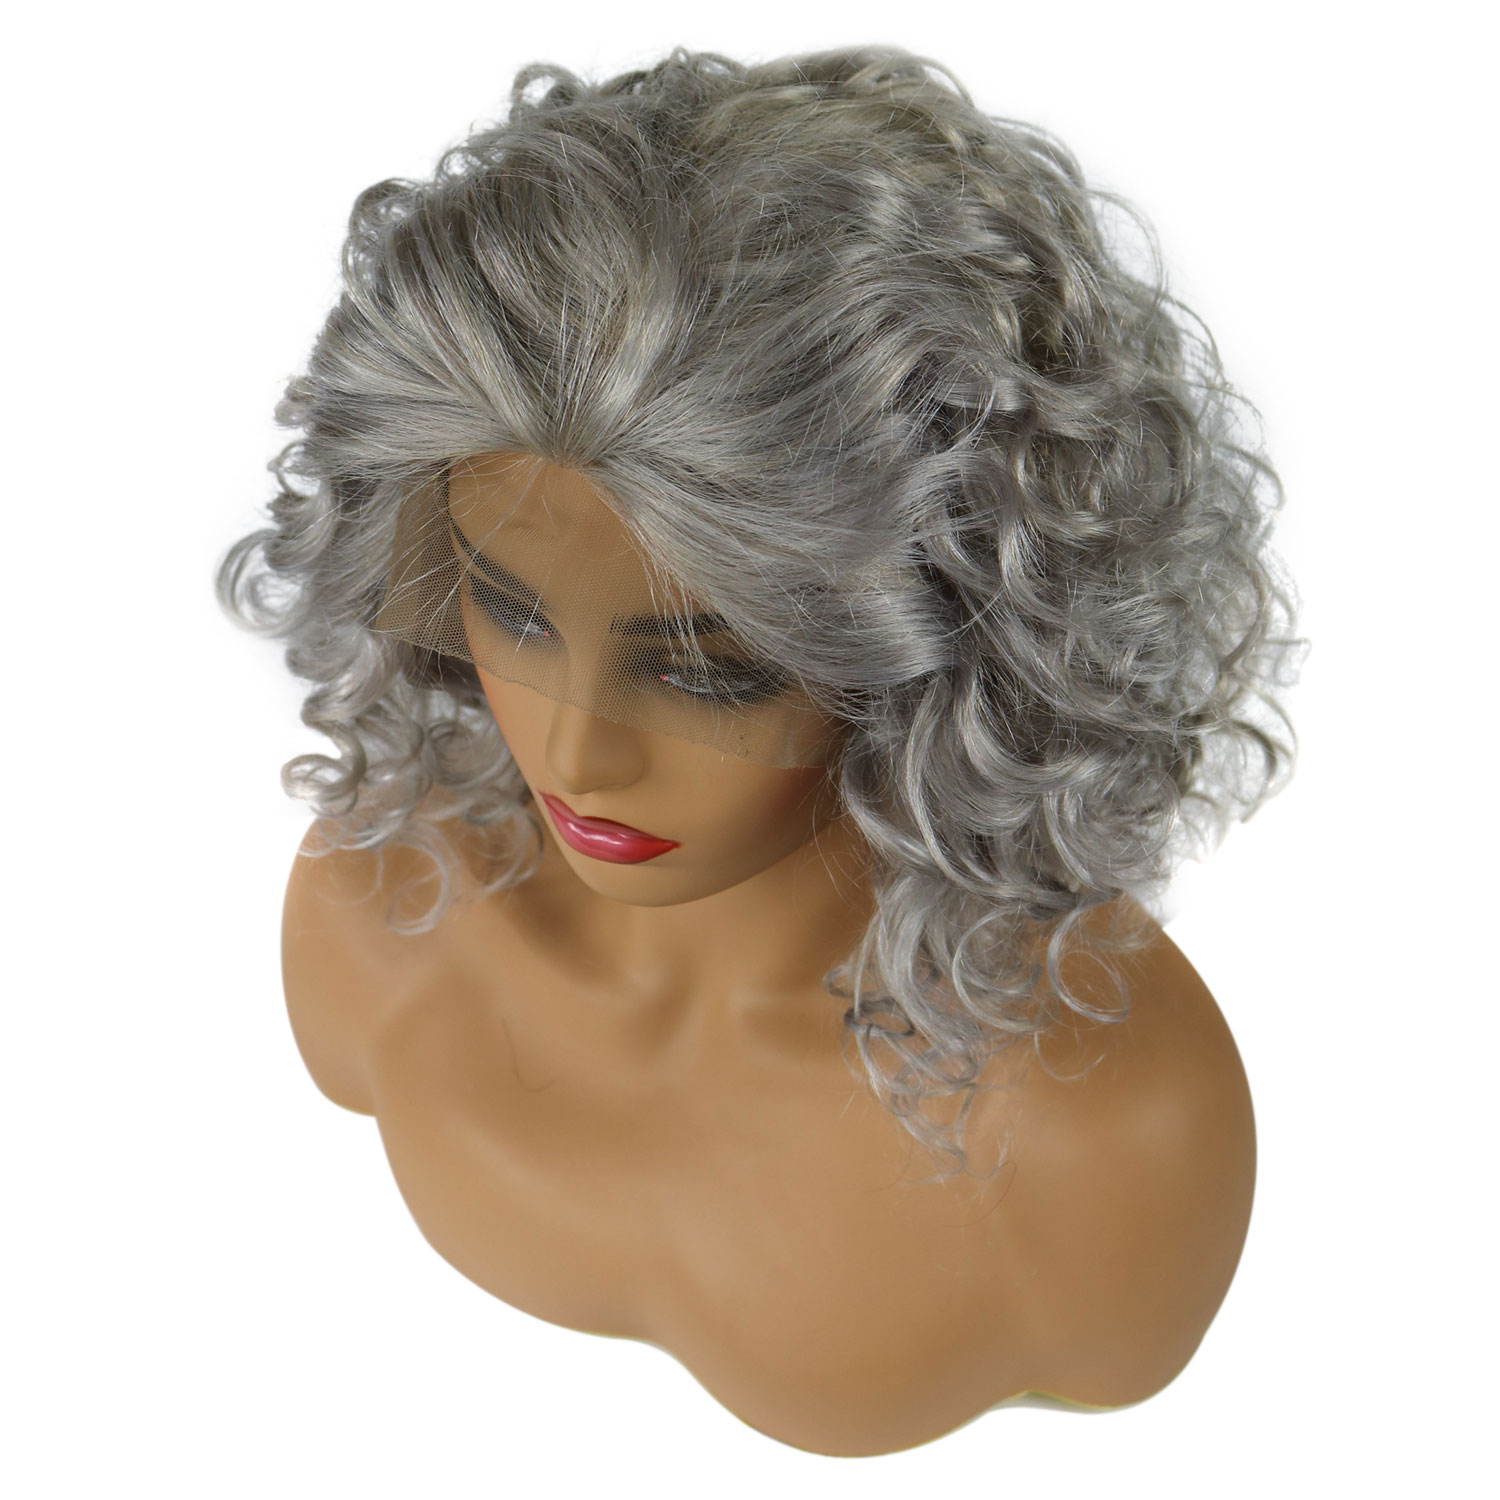 Salt And Pepper Hair Lace Front Cap Women Human Hair Curly 120% 14 Inches Wigs